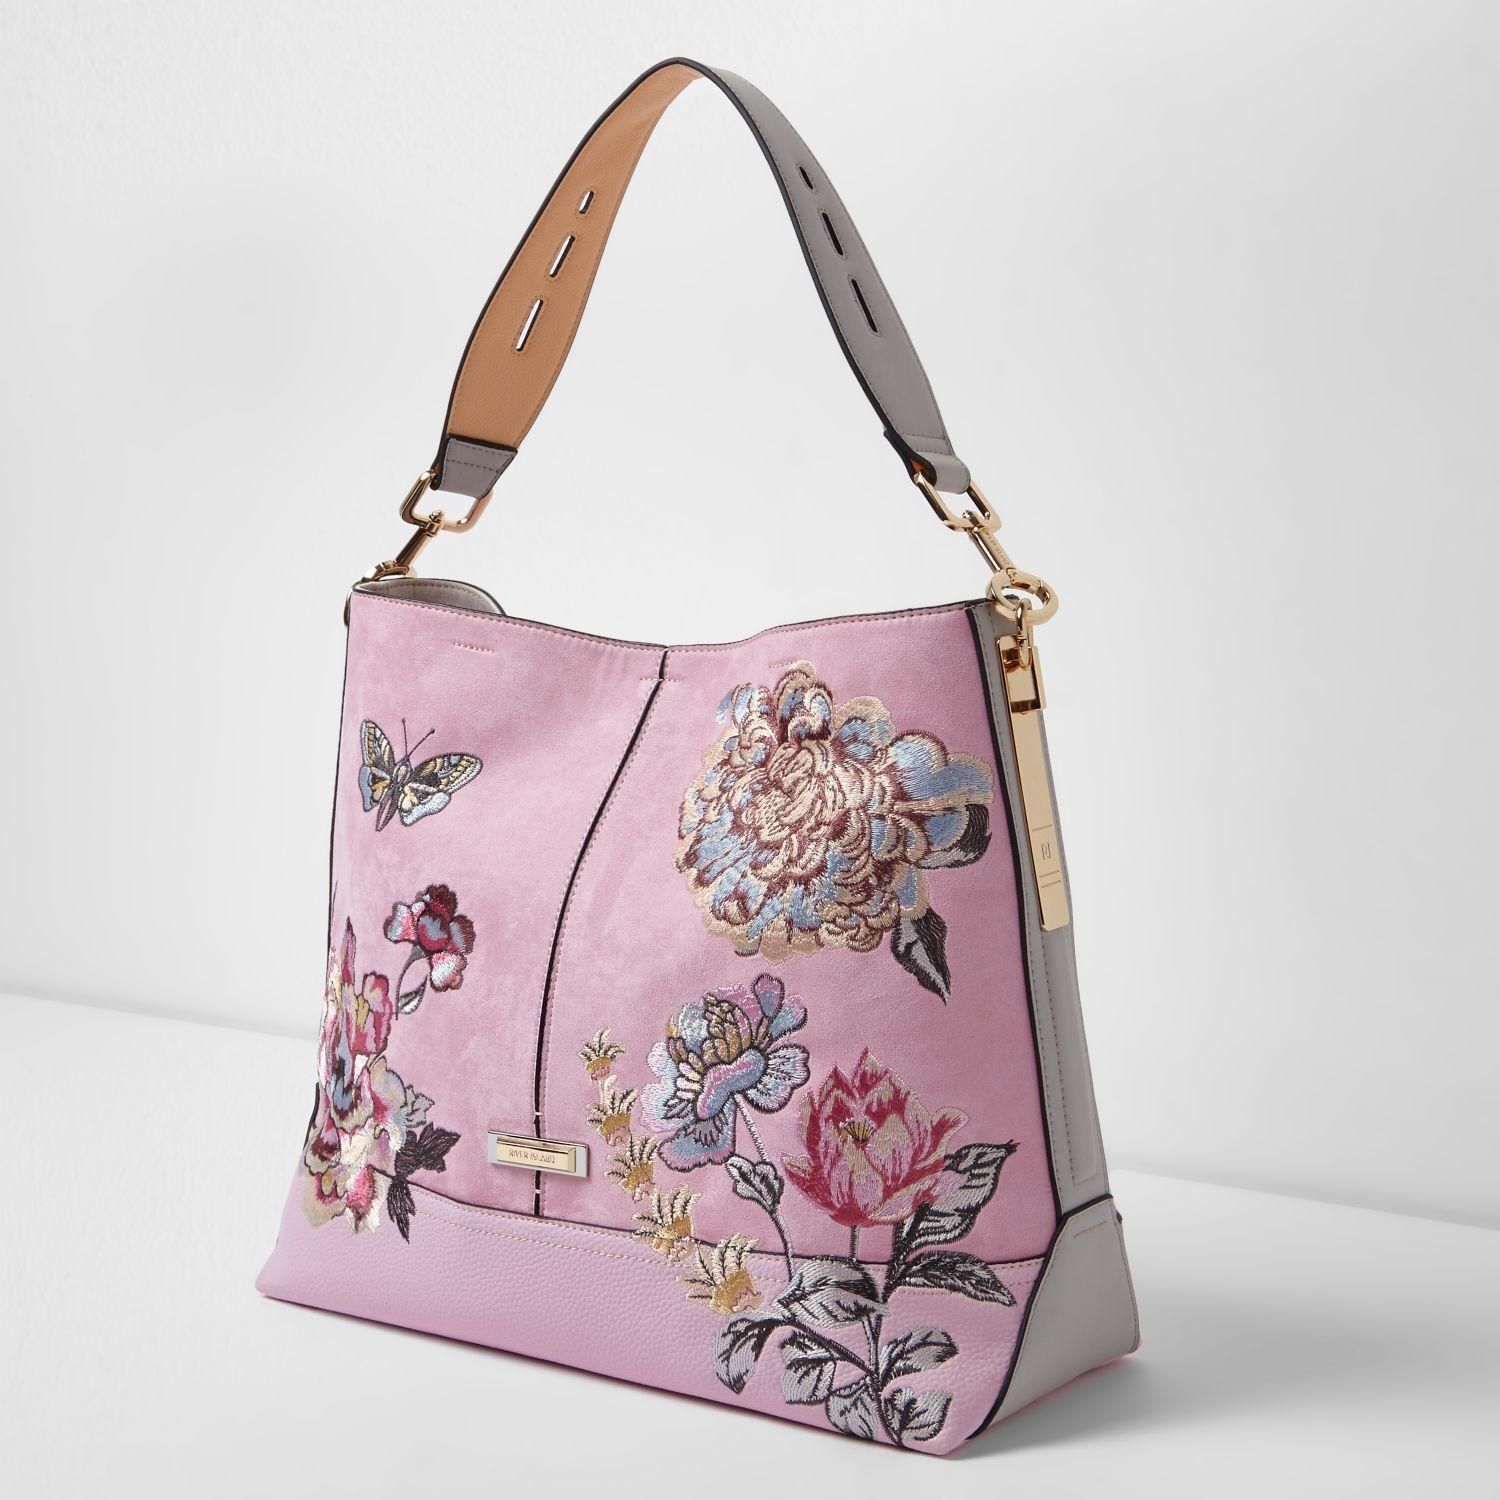 River Island Floral Embroidered Slouch Underarm Shoulder Bag in Pink - Lyst